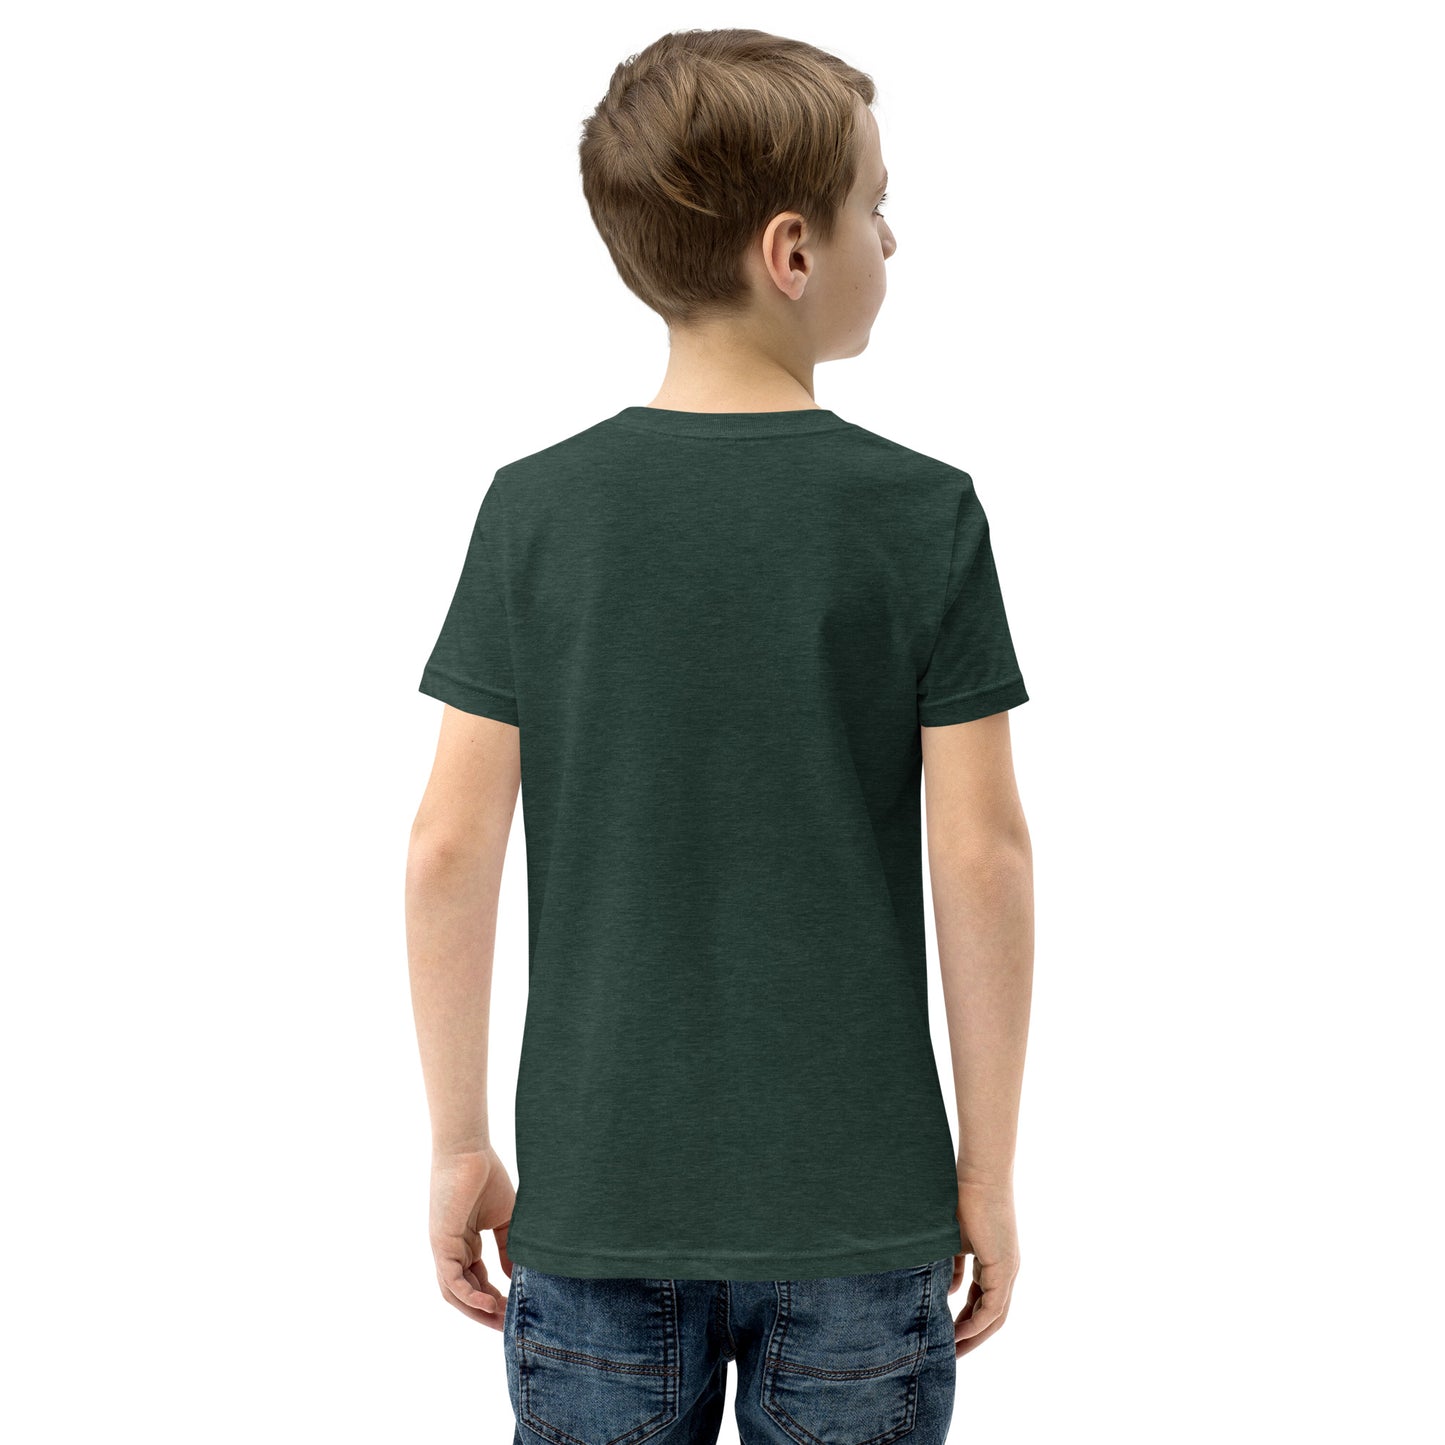 "Only on Main Street" (Greenspaces) Youth Short Sleeve T-Shirt